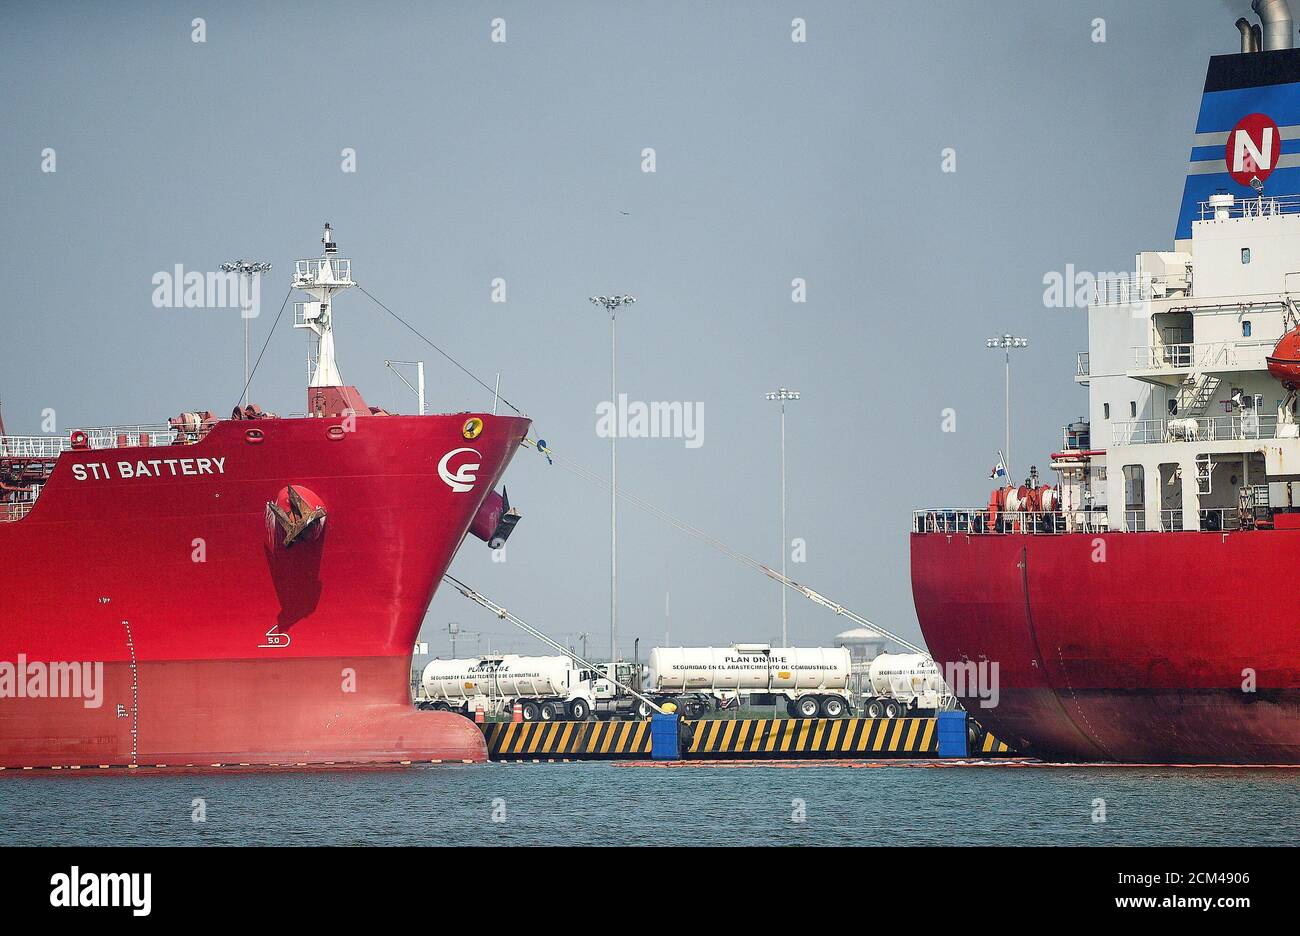 Tanker trucks are seen among oil tankers docked at the port of Tuxpan, in Veracruz state, Mexico April 22, 2020. Picture taken April 22, 2020. REUTERS/Oscar Martinez Stock Photo